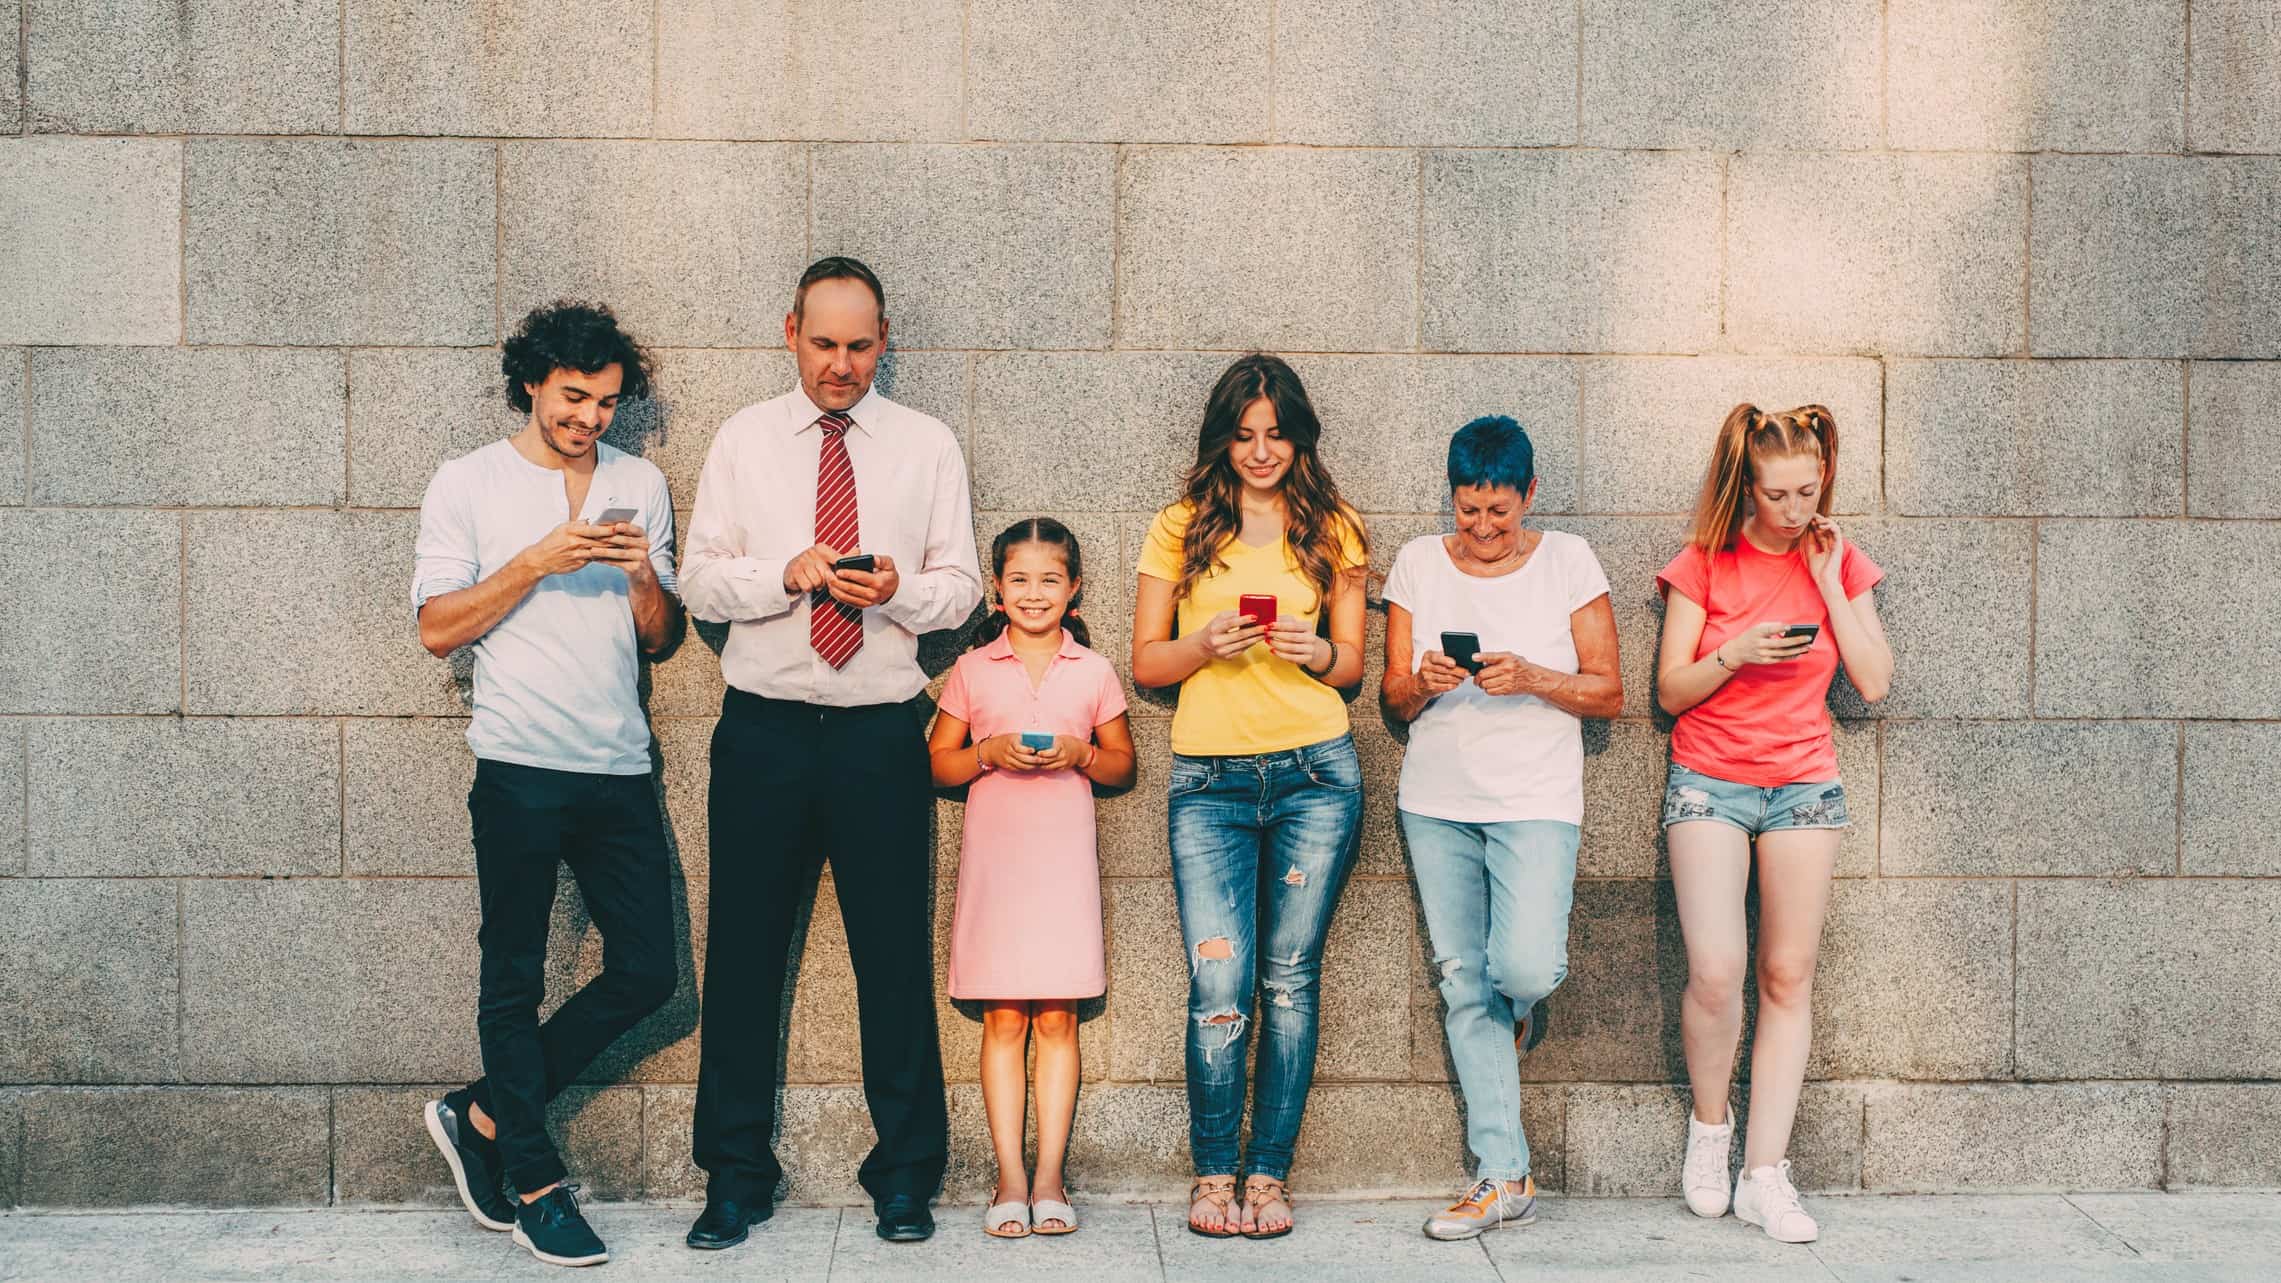 A group of people of all ages, size and colour line up against a brick wall using their devices.